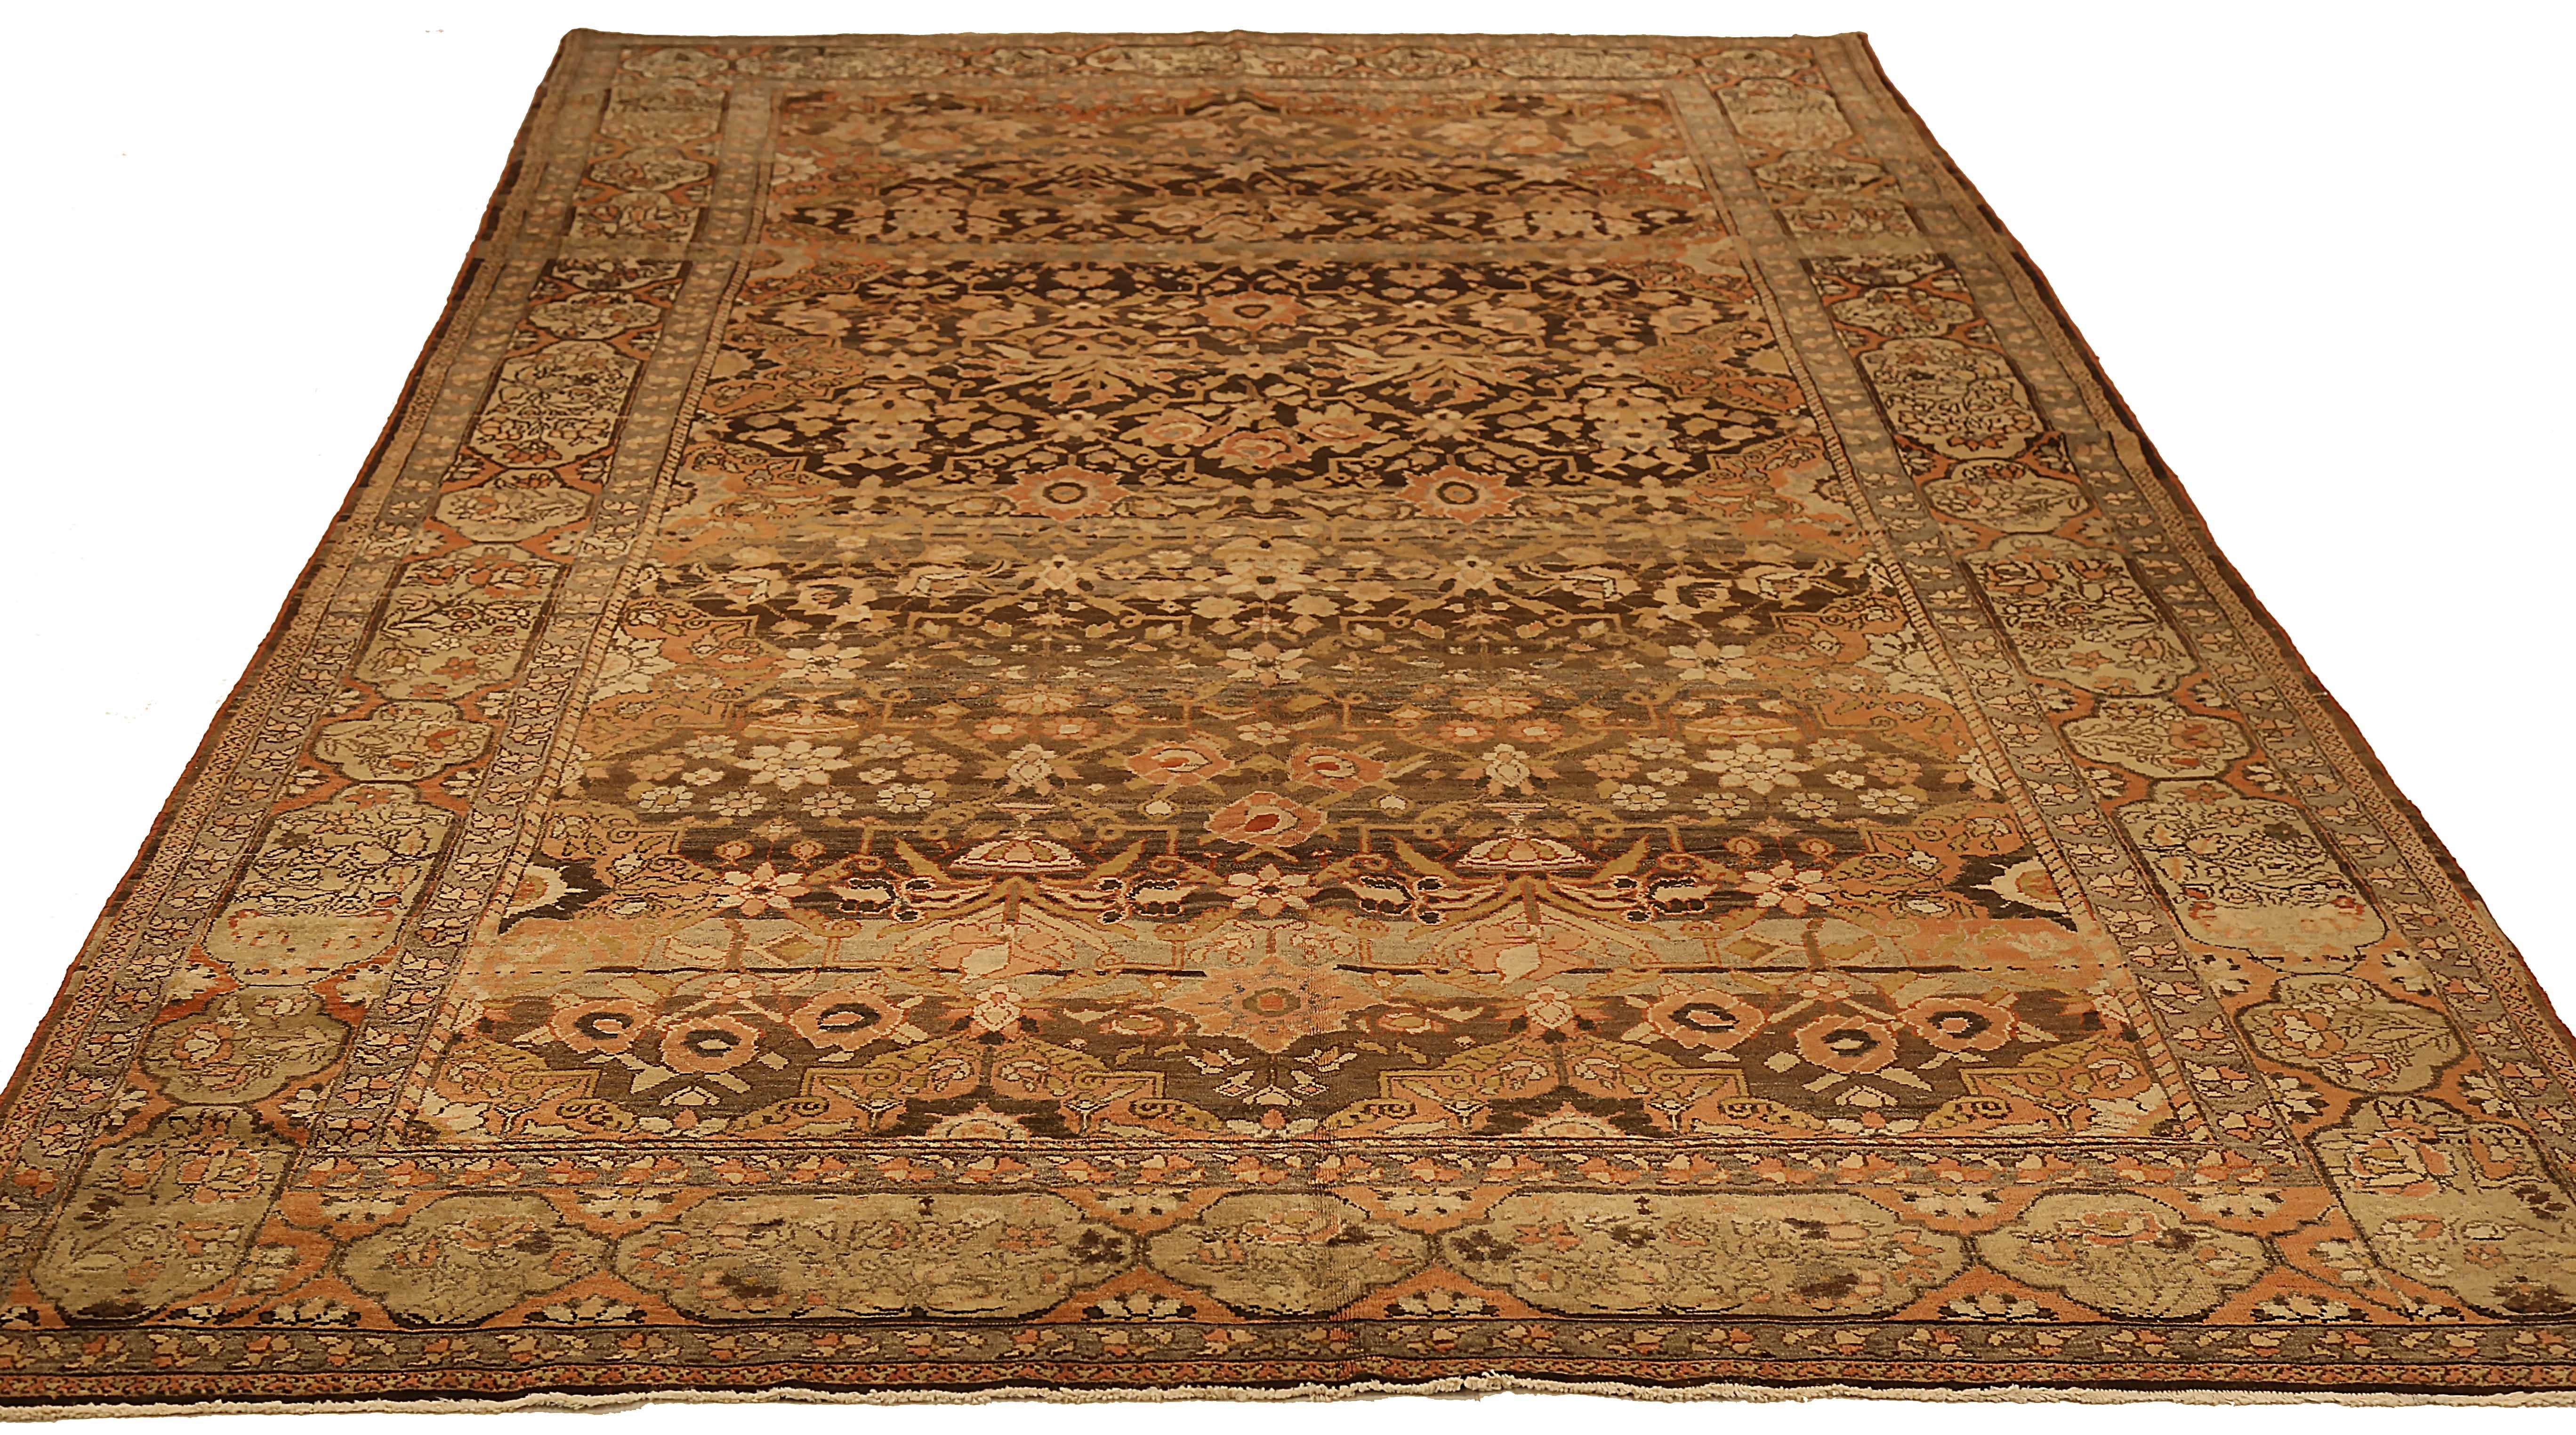 Antique Persian rug handwoven from the finest sheep’s wool and colored with all-natural vegetable dyes that are safe for humans and pets. It’s a traditional Bakhtiar design highlighted by floral details all-over a deep brown field. It’s a beautiful